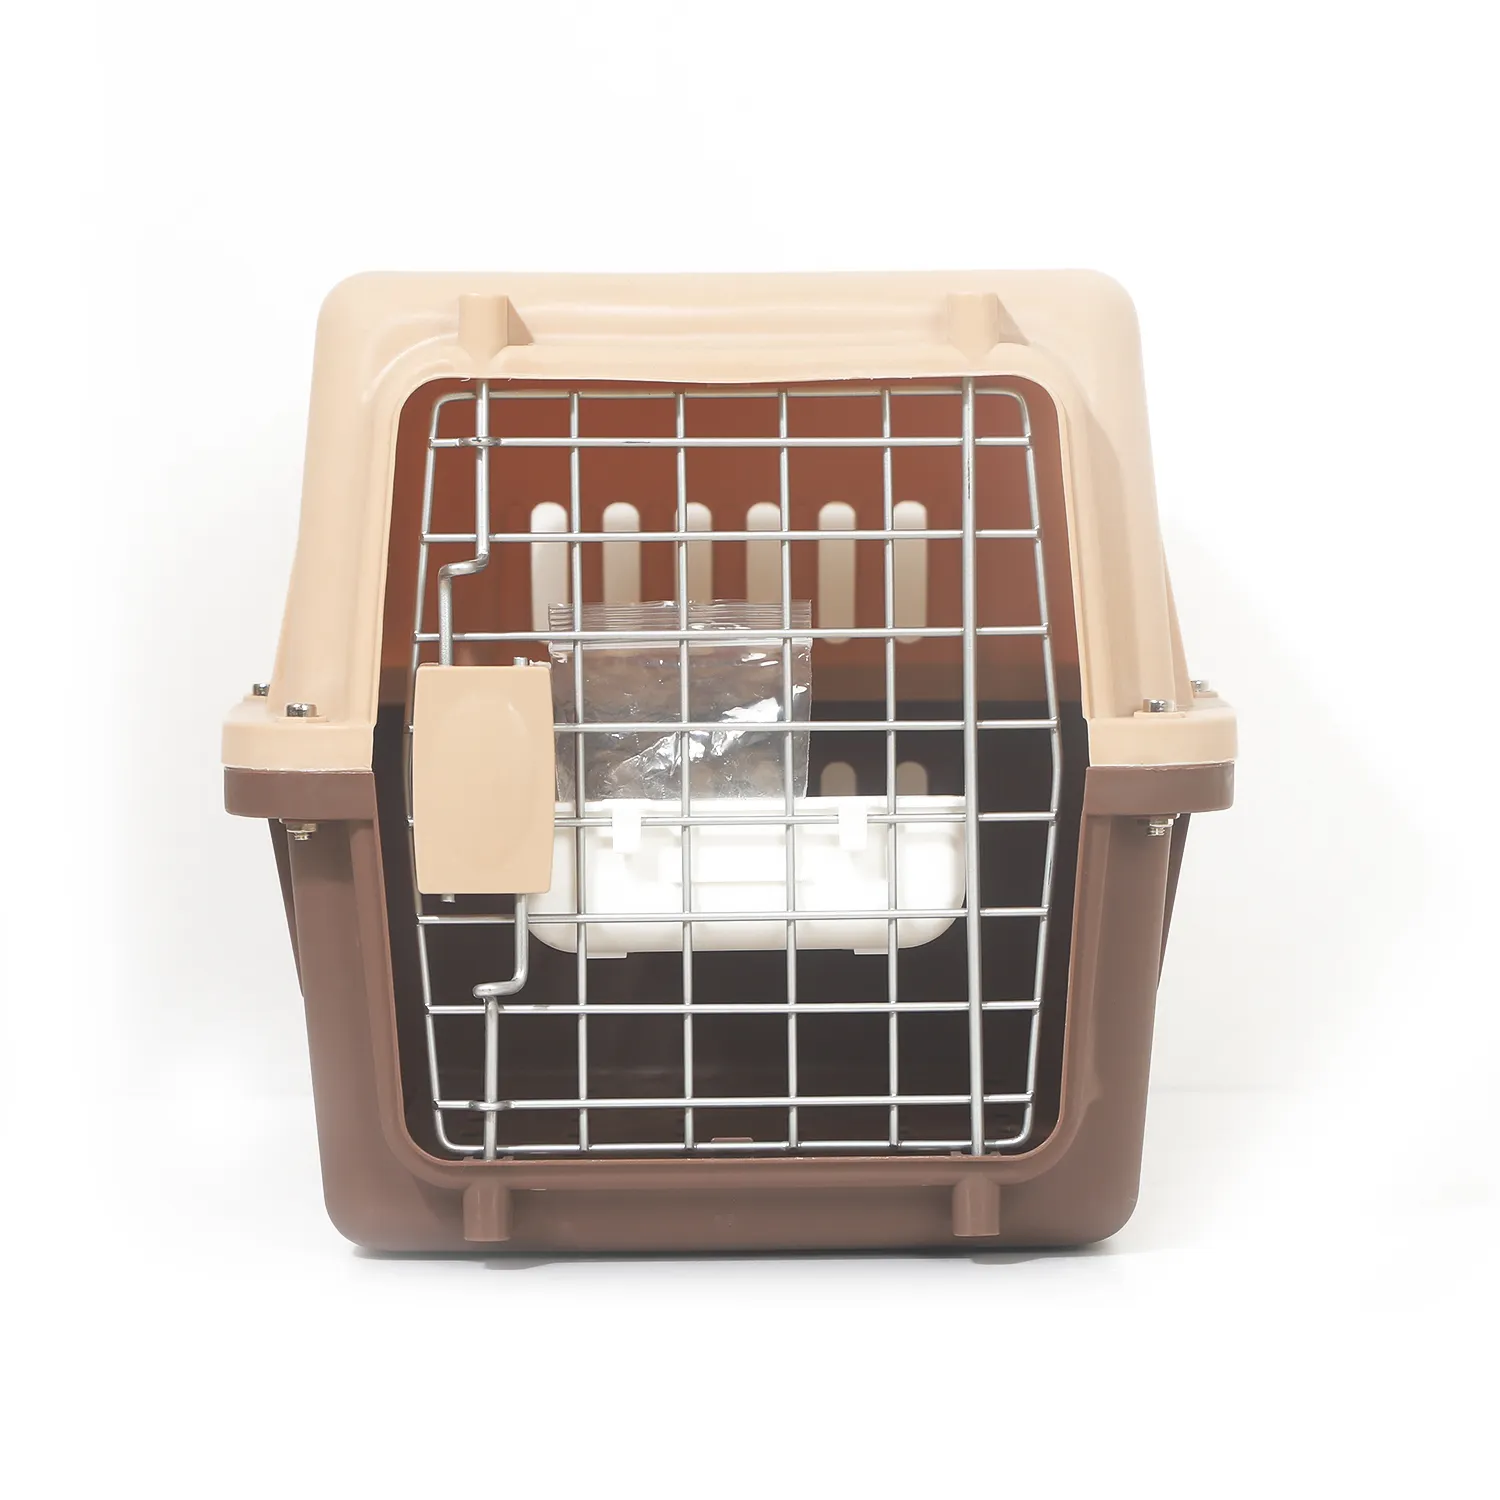 PAKEWAY Outdoor Pet Kennel,Travel Pet Carrier,Hard Sided Dog and Cat Carrier